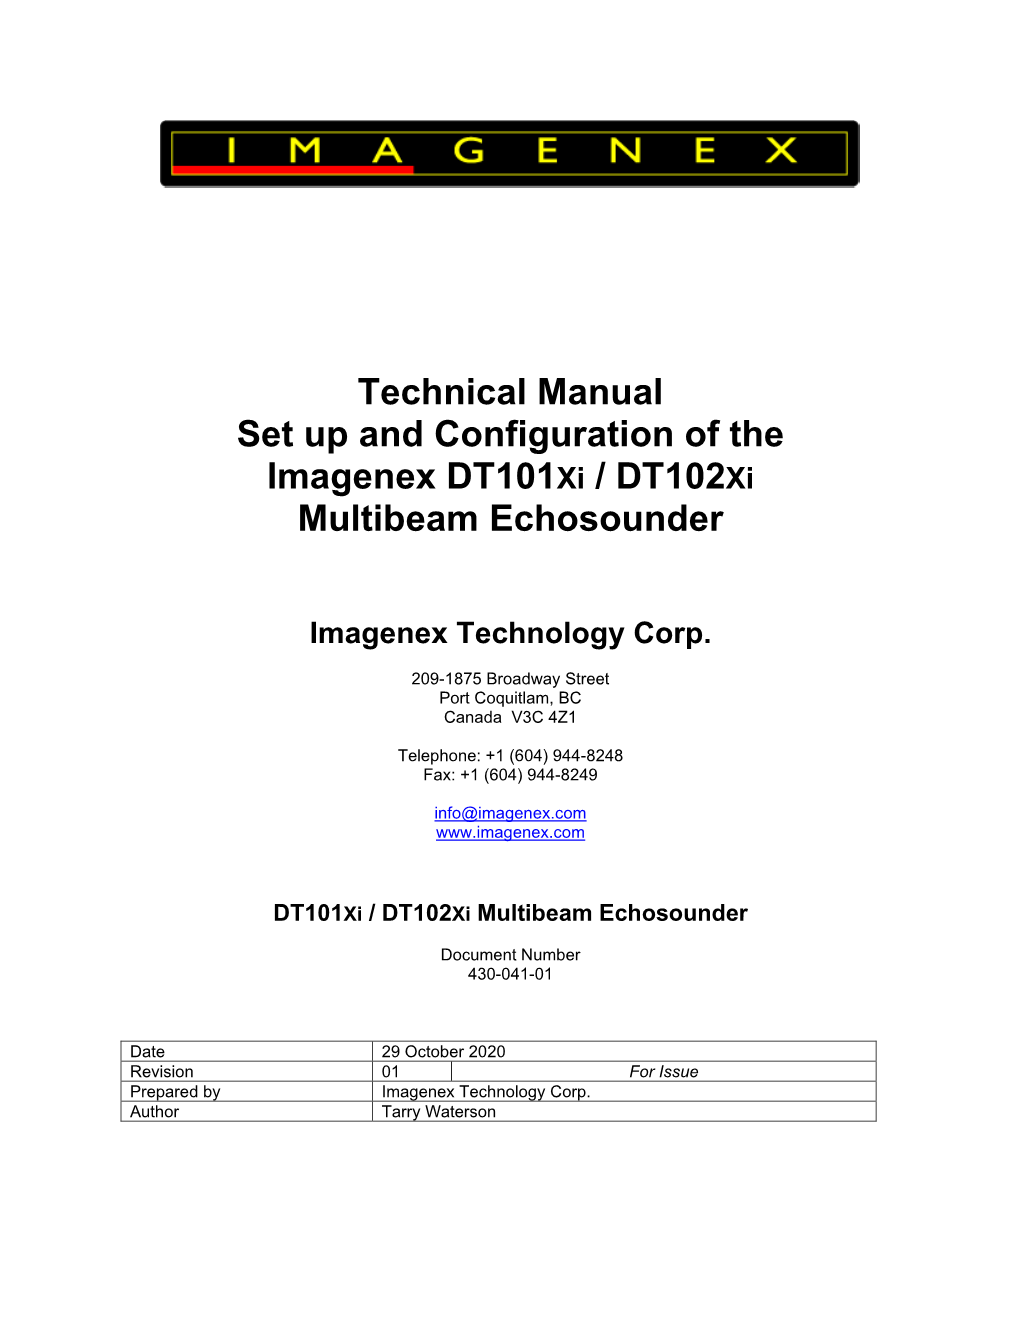 Set up and Configuration of the Imagenex Dt101xi Dt102xi.Pdf